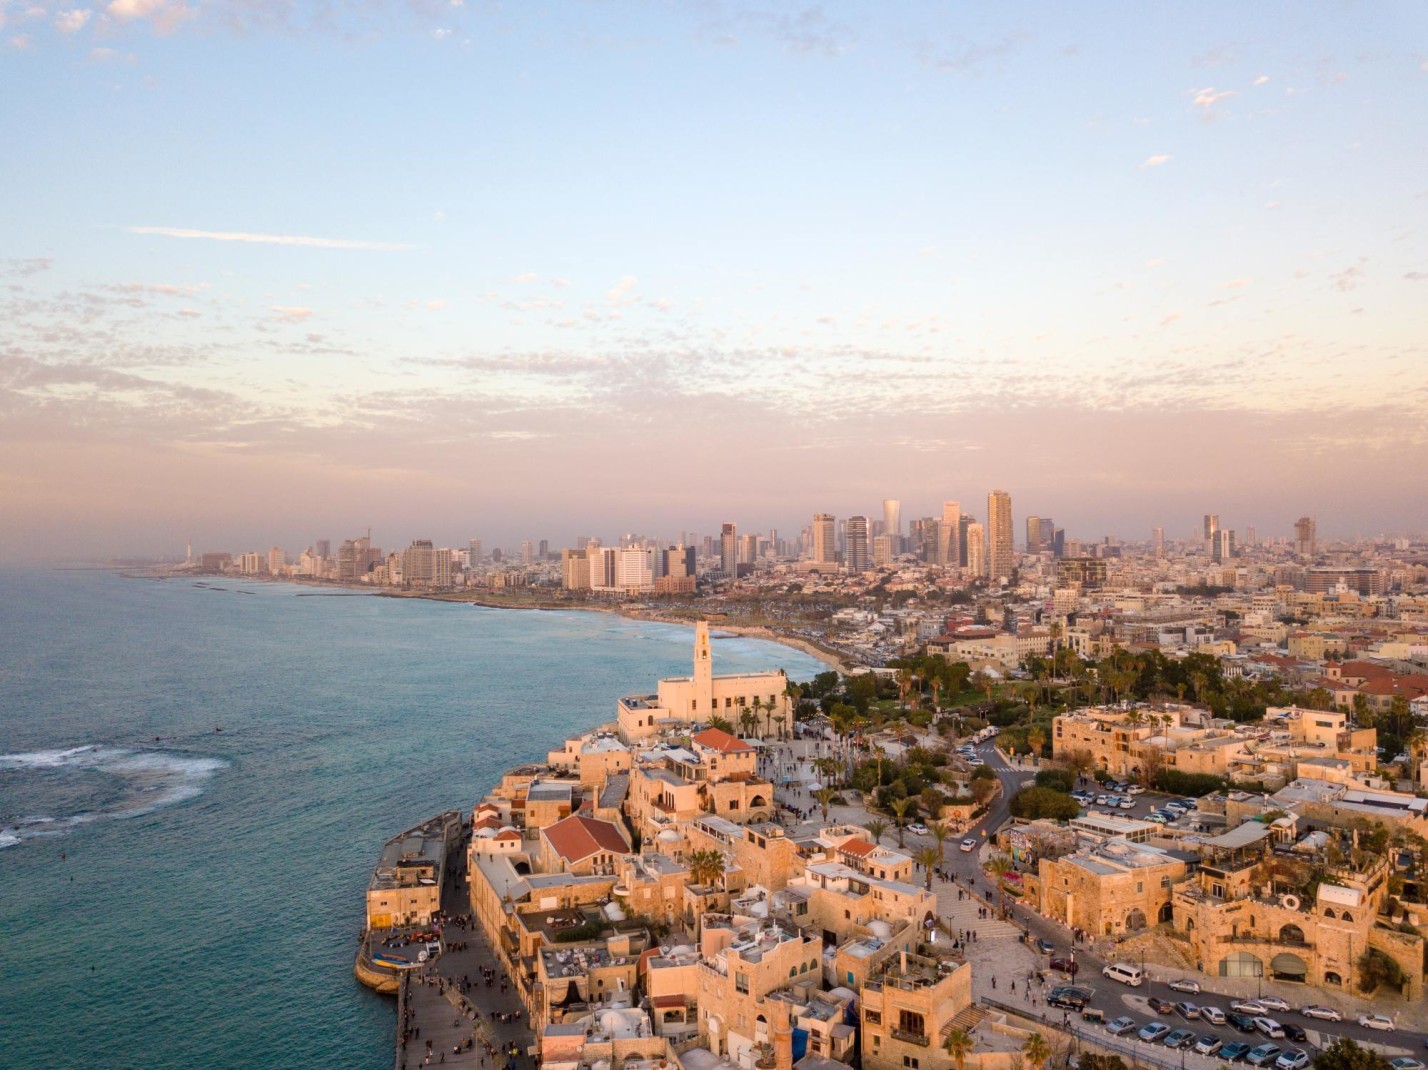 City with modern and historic buildings, Tel Aviv, next to ocean as the sun sets.